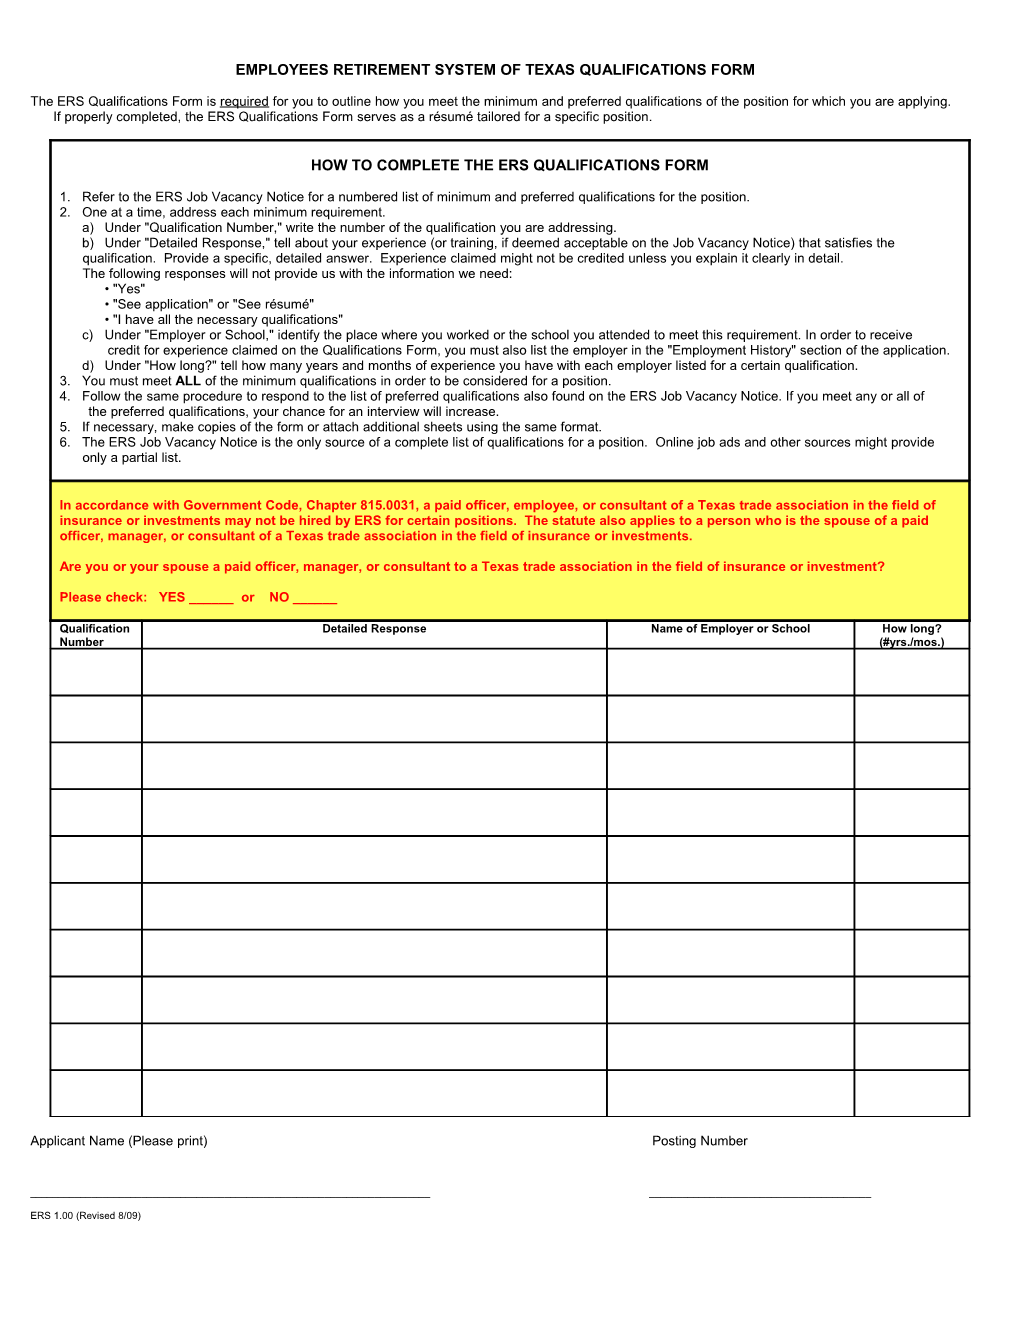 Employees Retirement System of Texas Qualifications Form